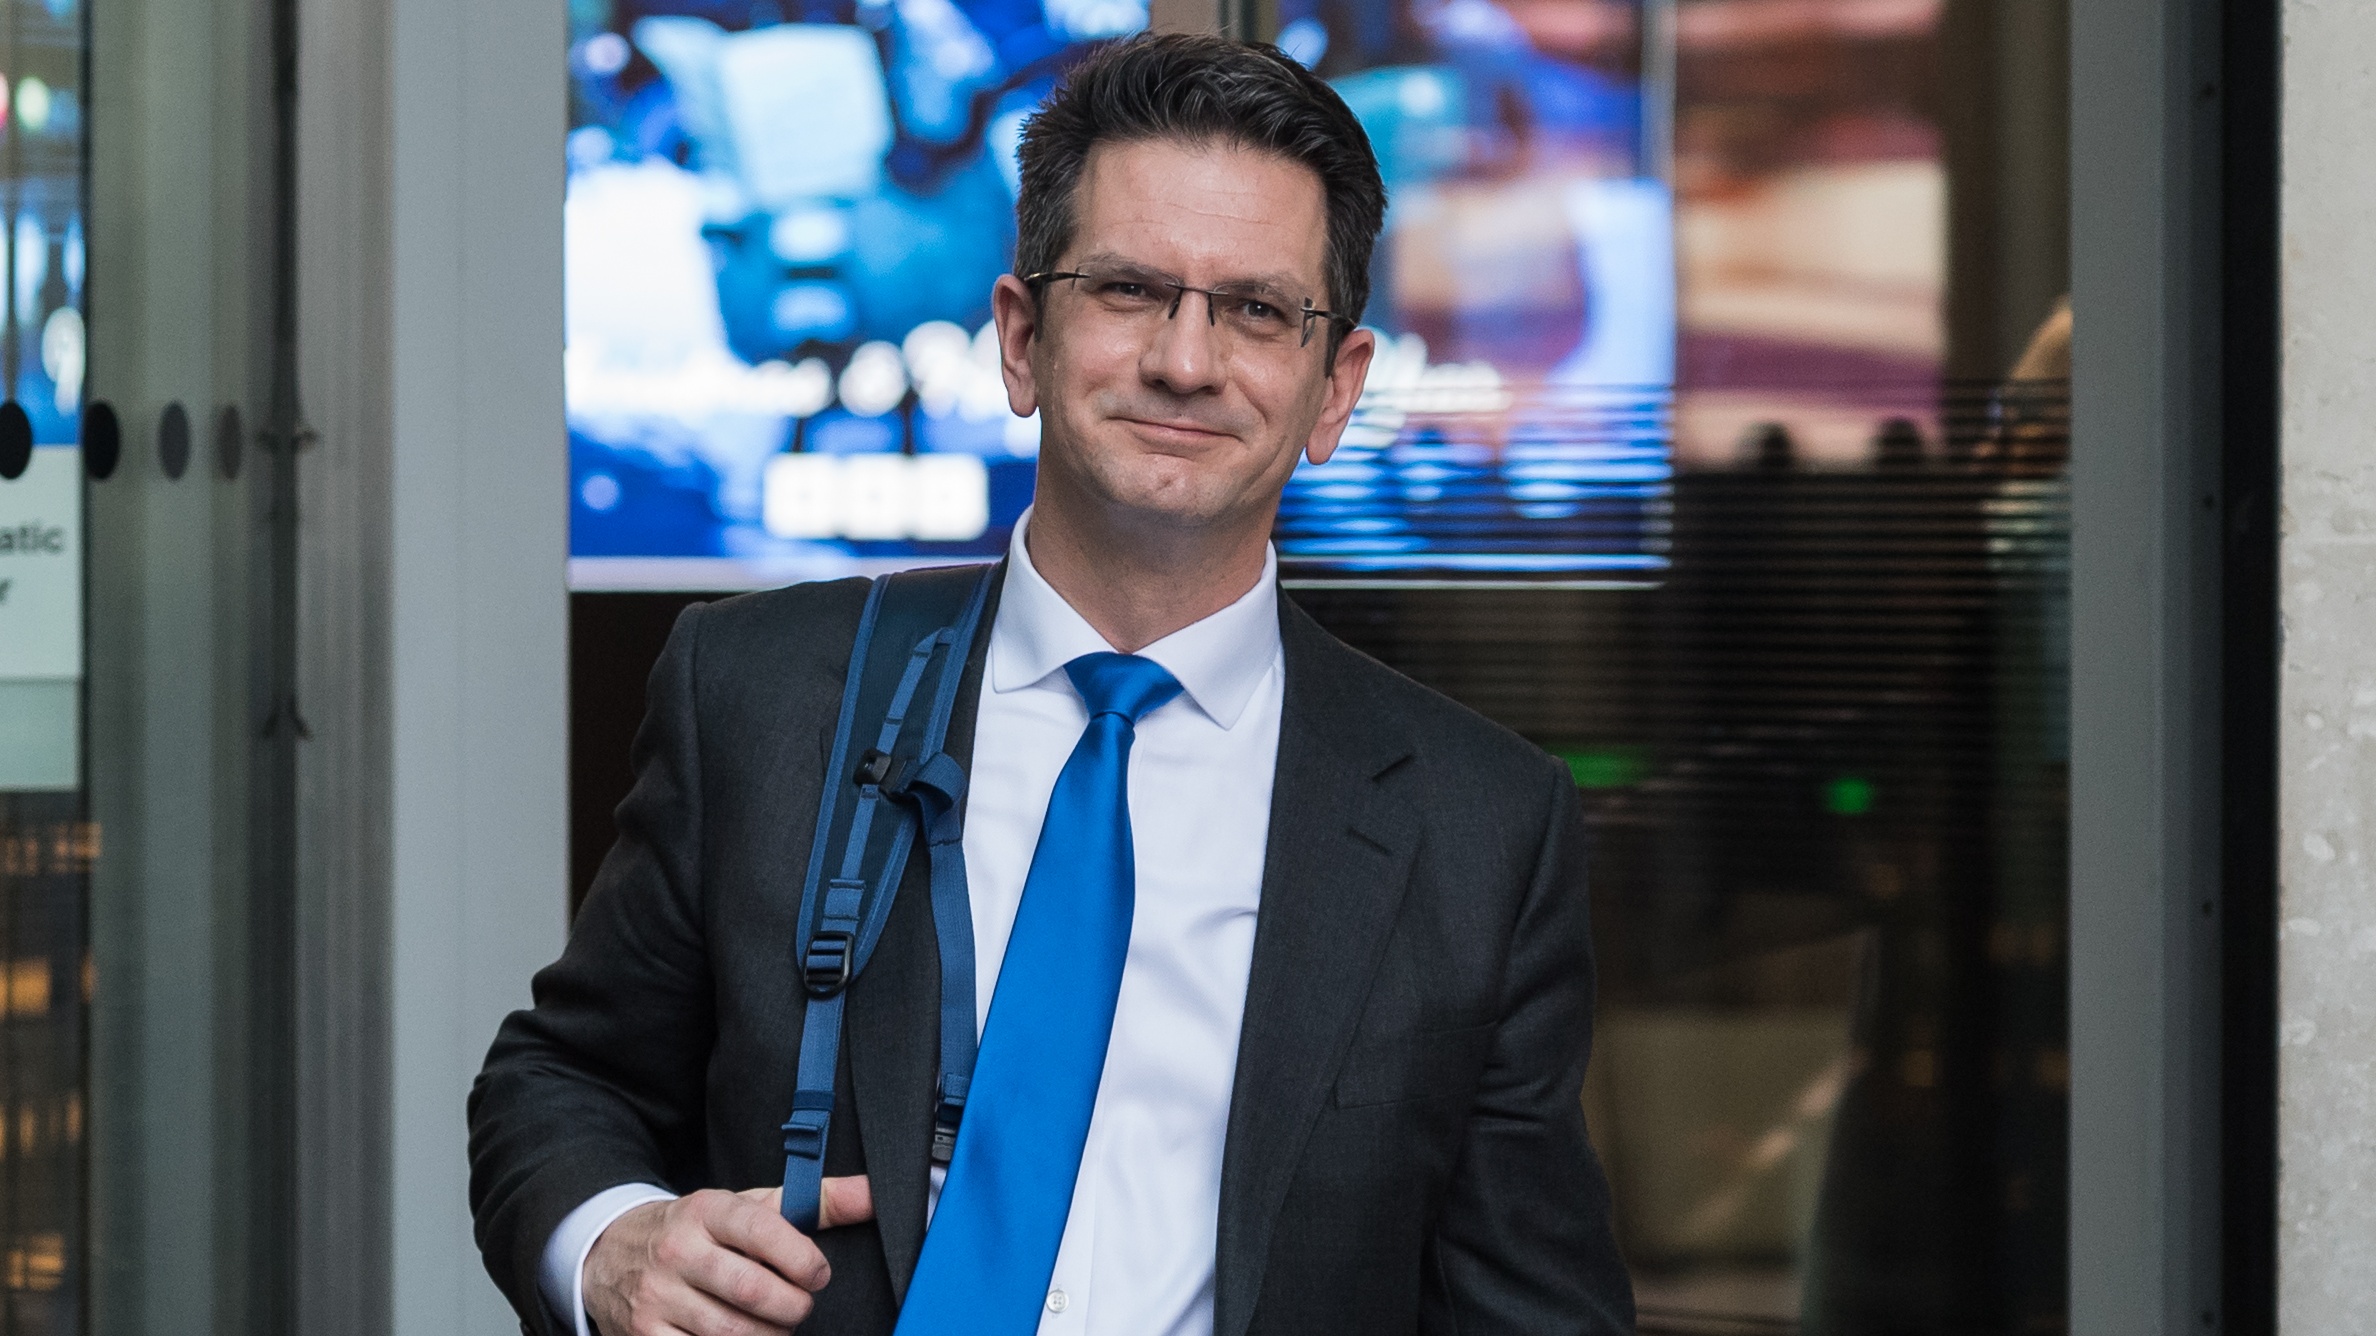 Former chair of the European Research Group Steve Baker is a known member